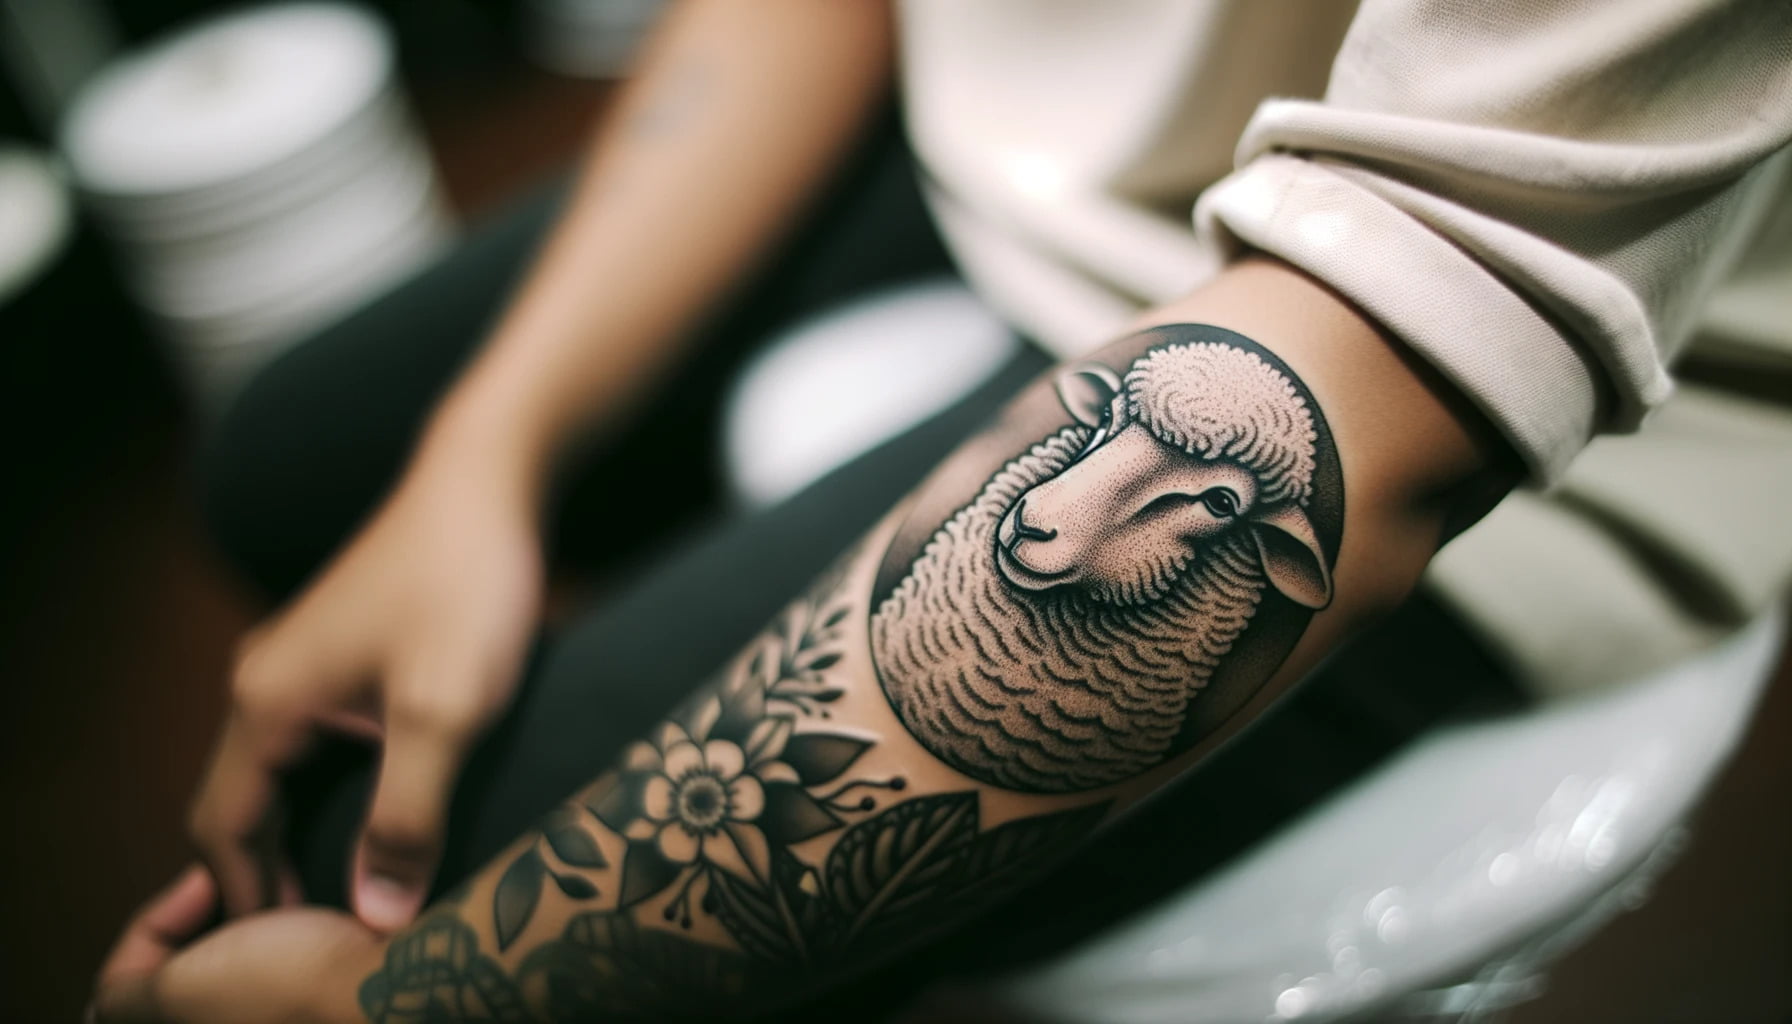 sheep tattoo meaning